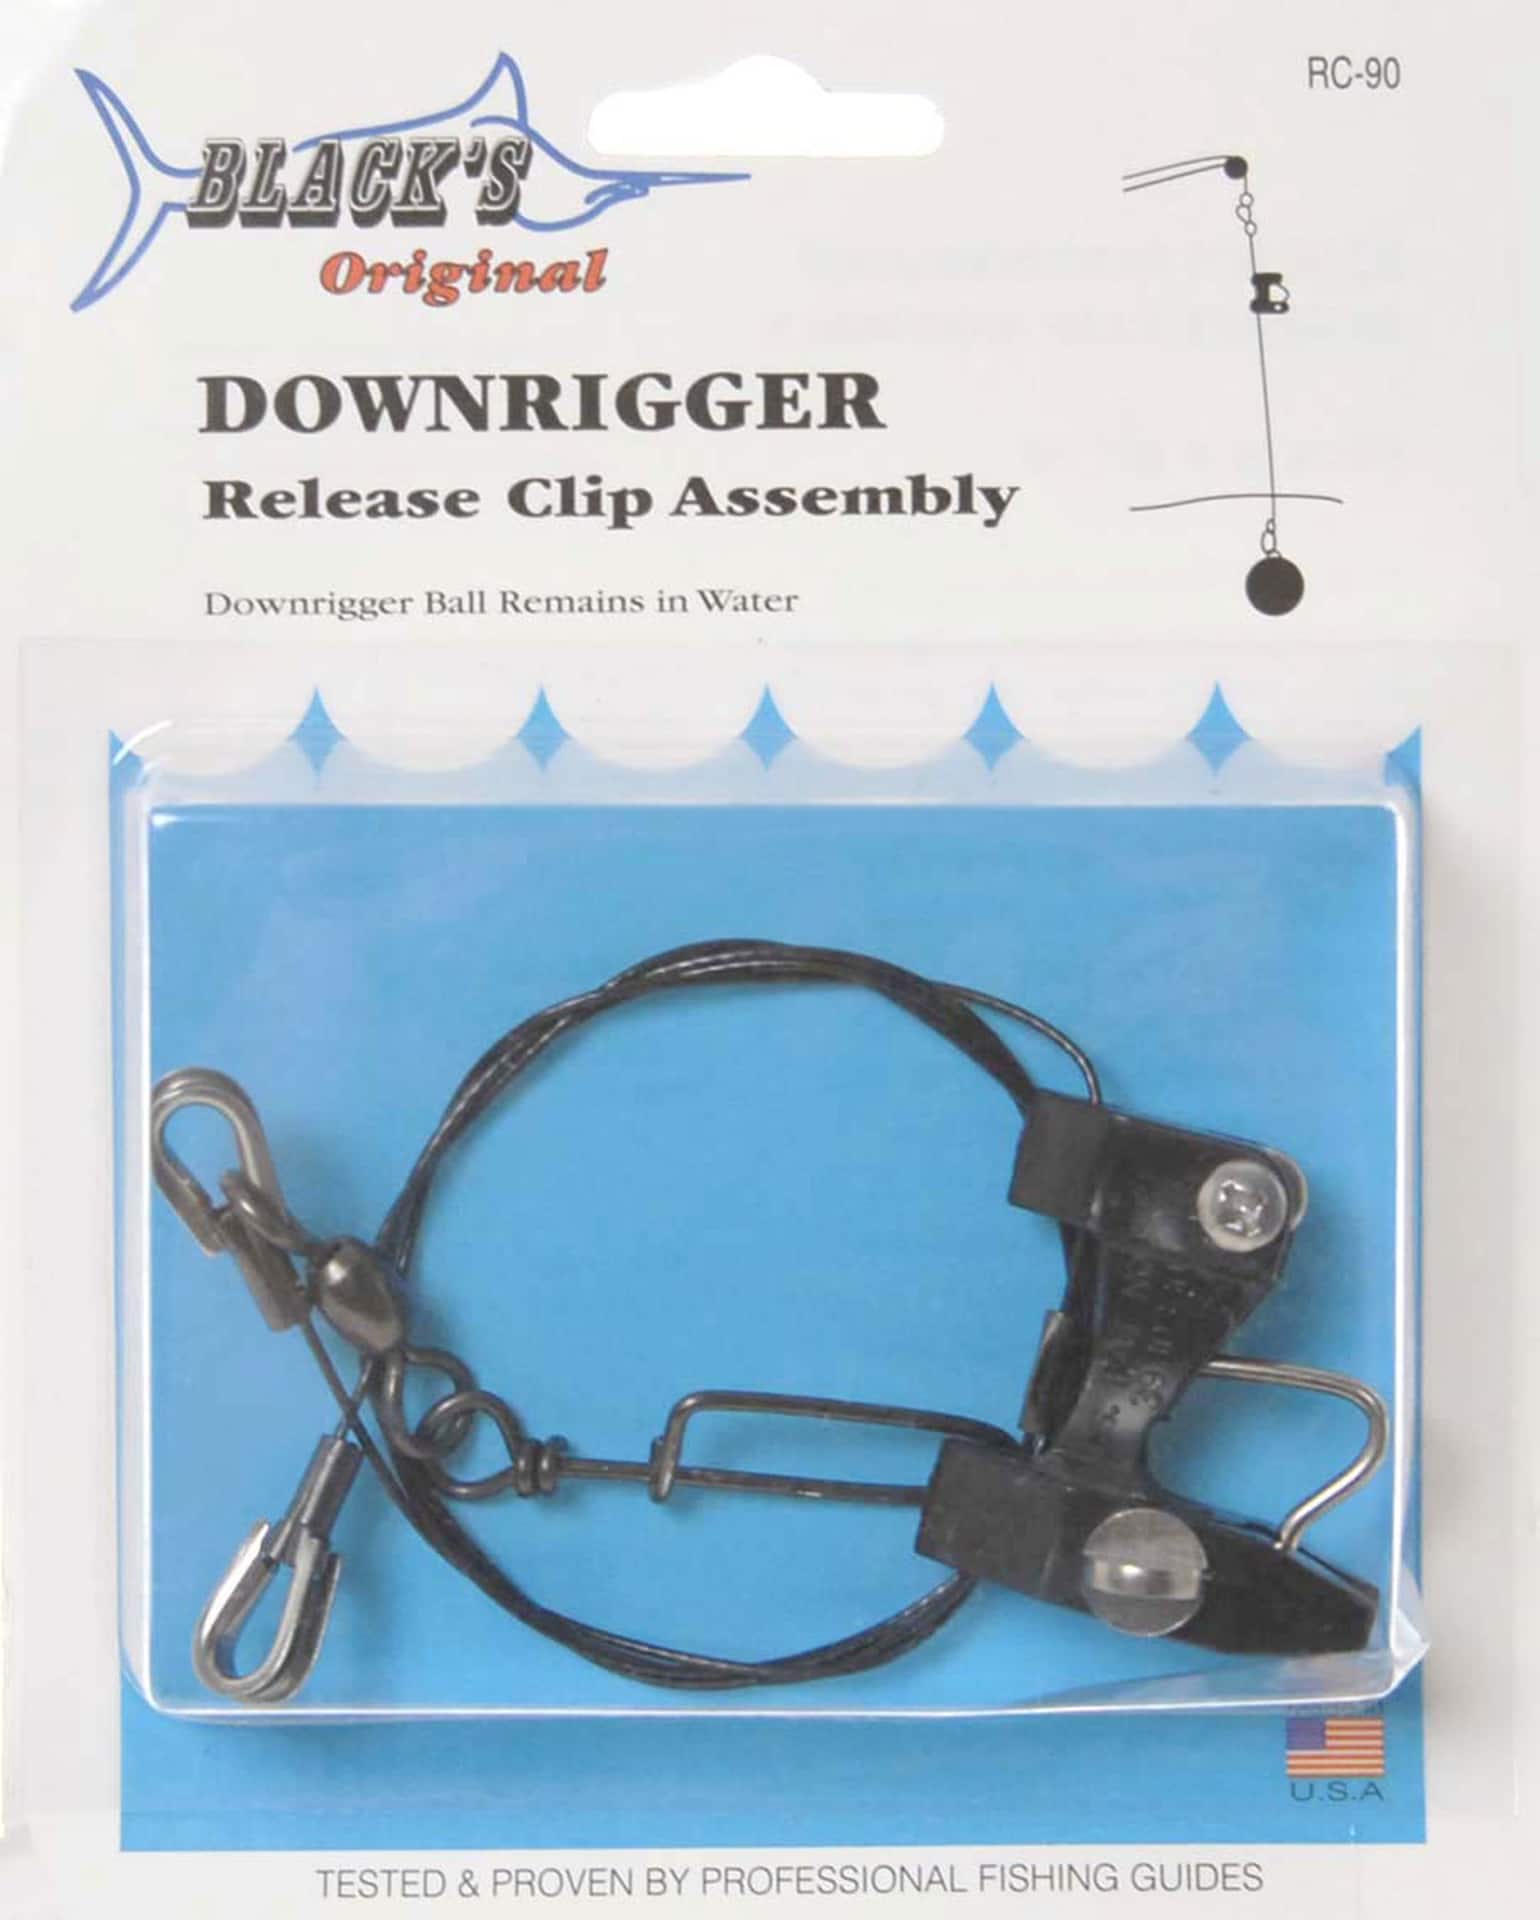 Clip Release Downrigger Planer Quick Power Fishing Fishing Gifts